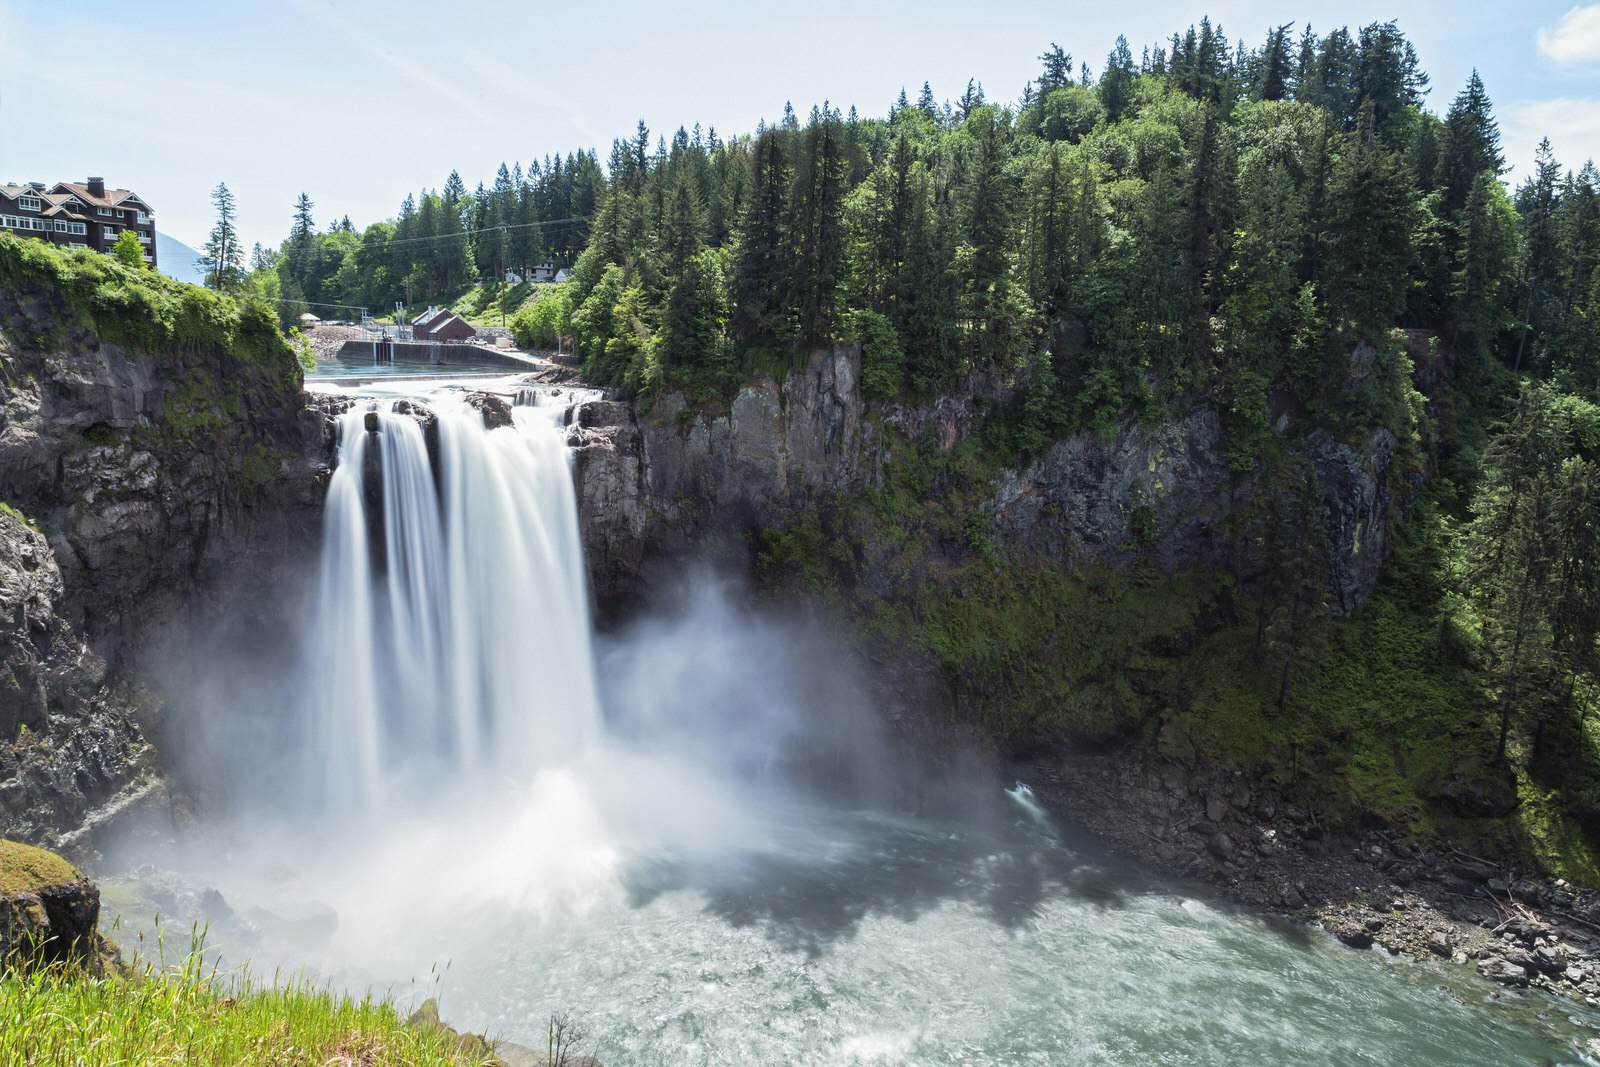 Fans of cult TV hit Twin Peaks will recognise Snoqualmie Falls © Westend61 / Getty Images